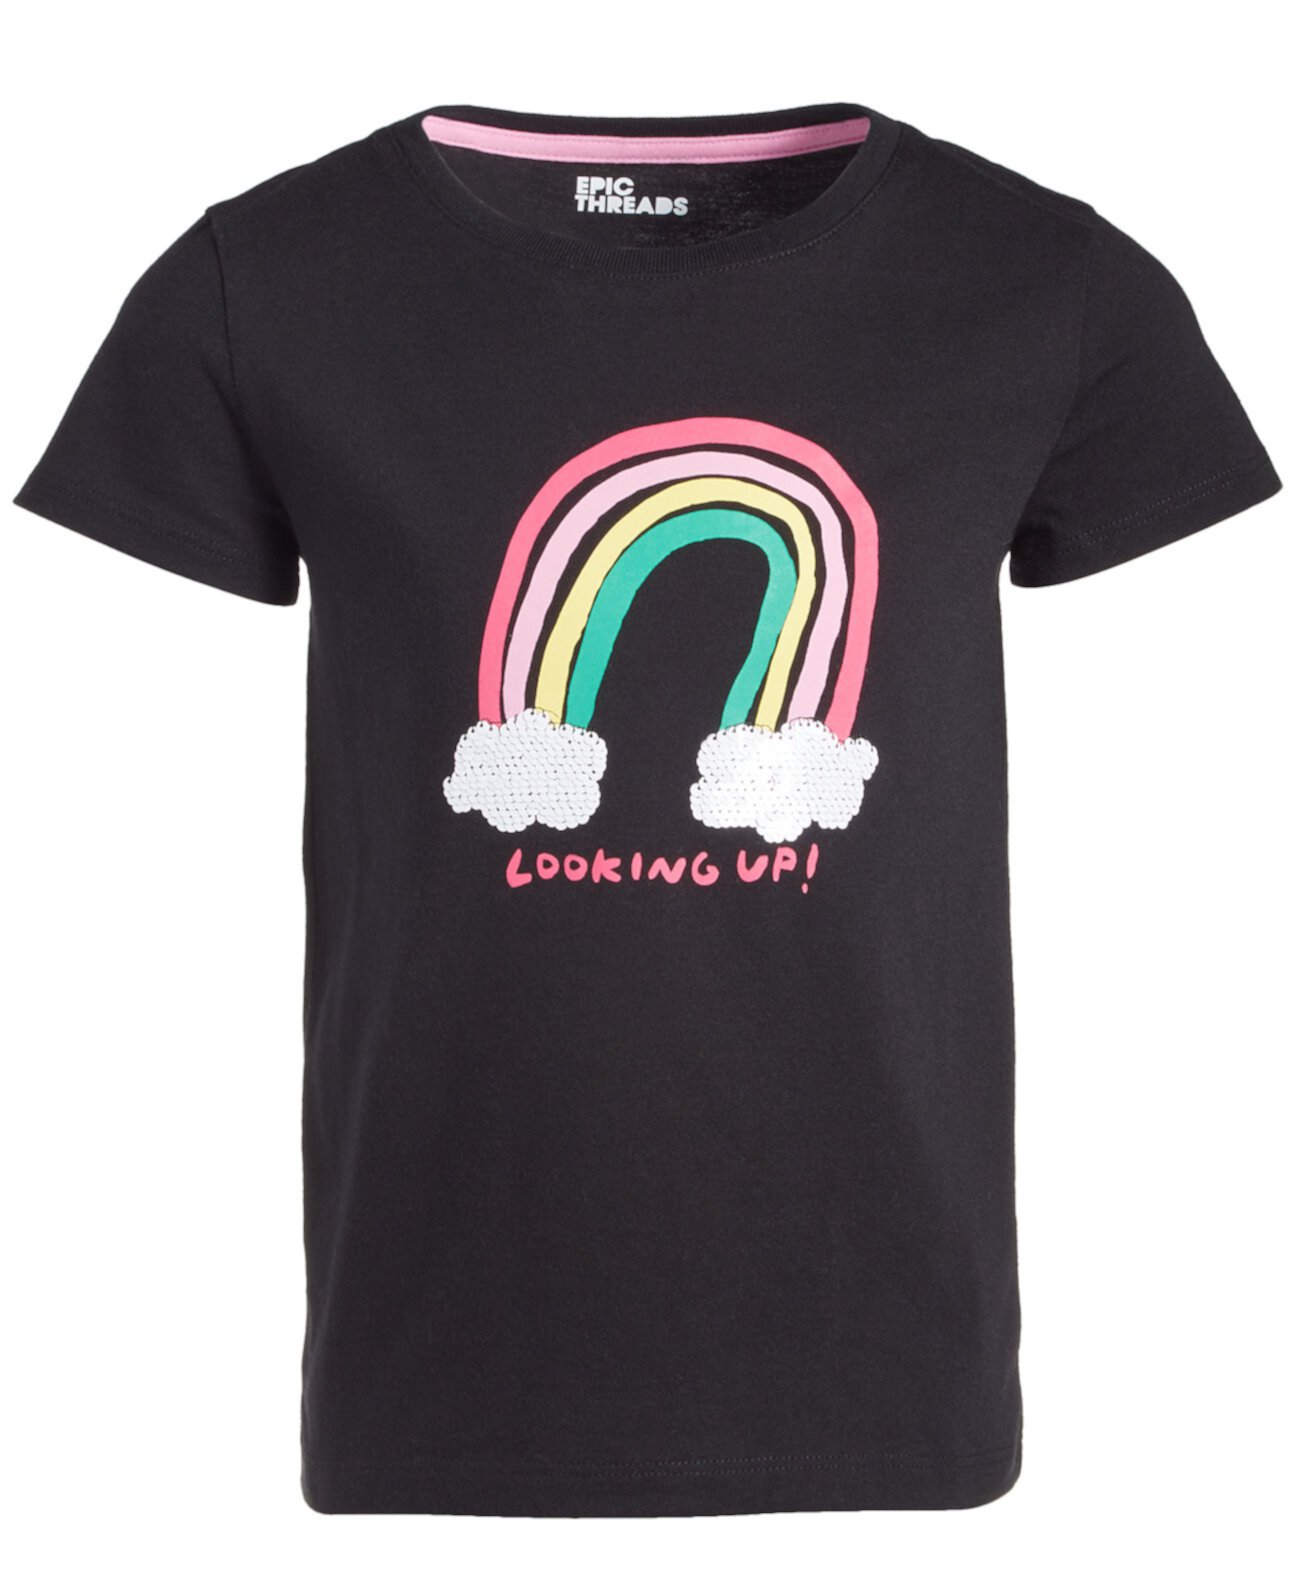 Toddler & Little Girls Looking Up Rainbow Graphic T-Shirt, Created for Macy's Epic Threads